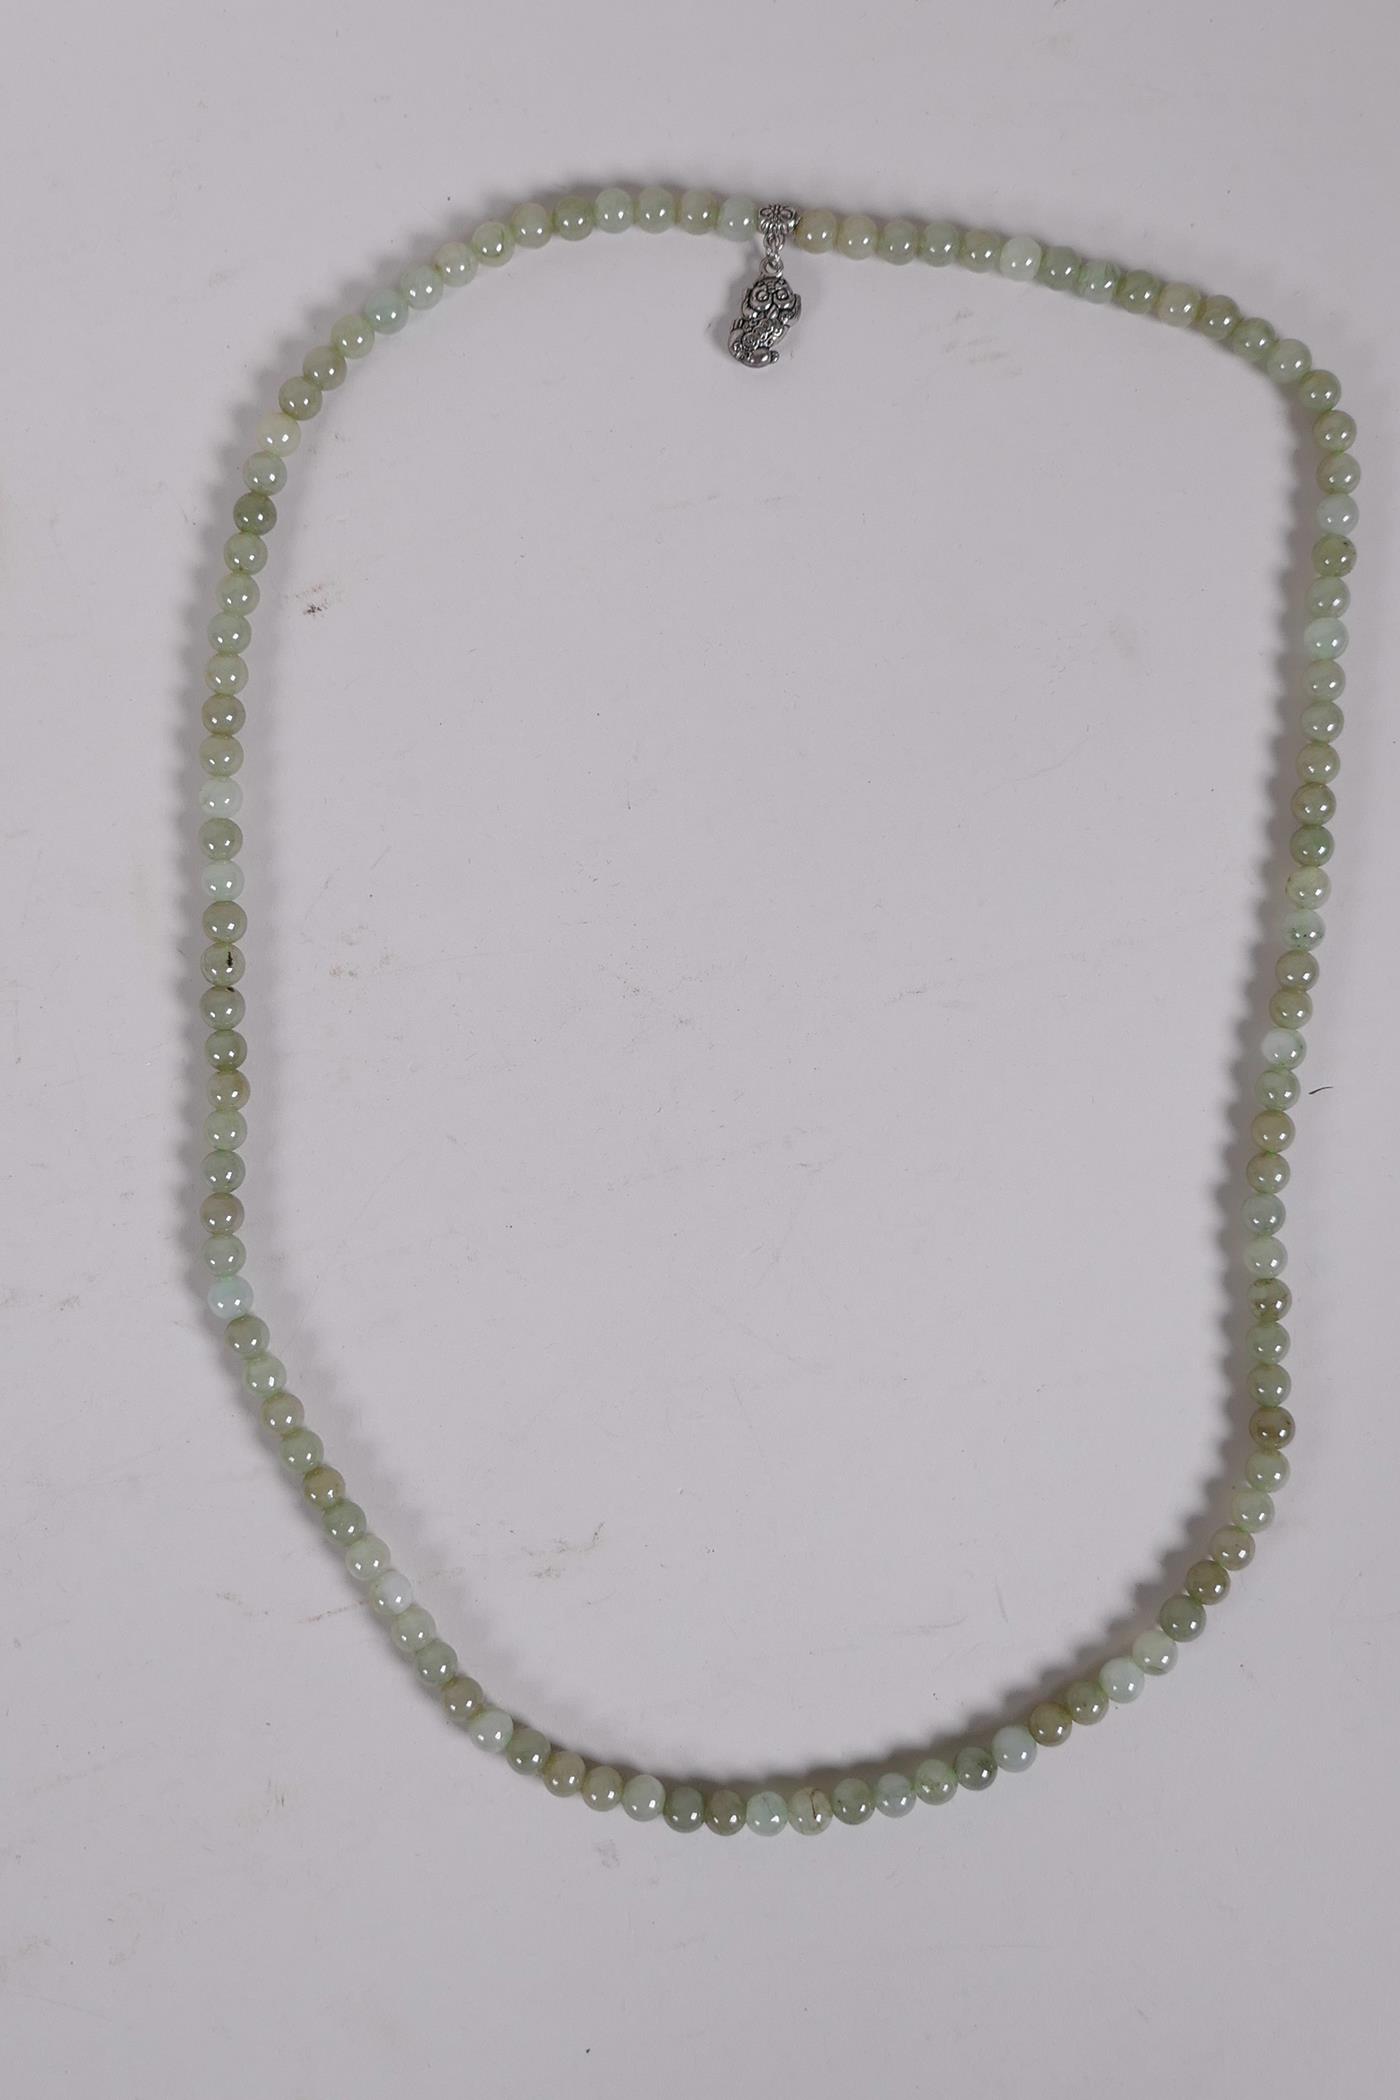 A Chinese celadon jade necklace, 27" long